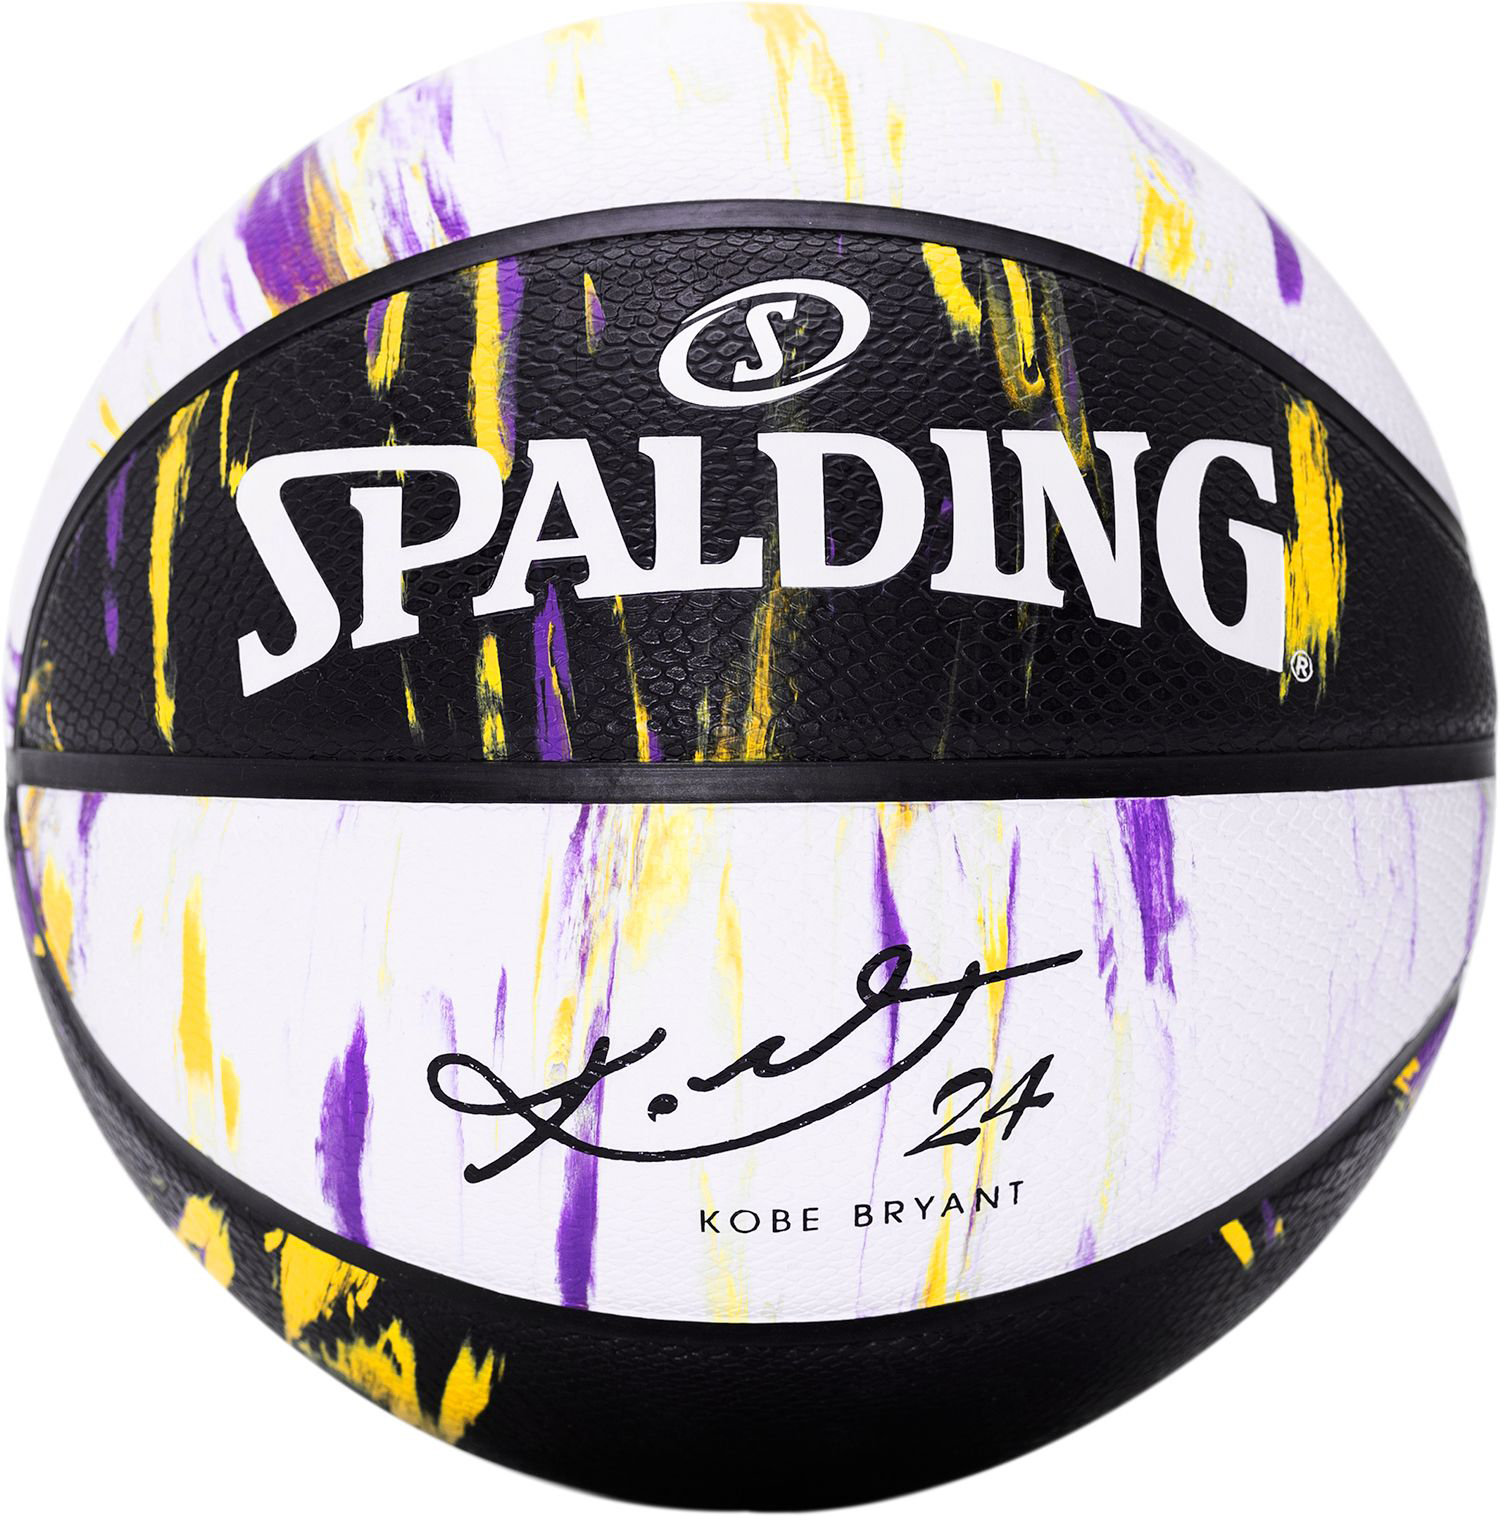 NEW SPALDING Basketball KOBE BRYANT Marbled Series LIMITED EDITION LAKERS COLORS 